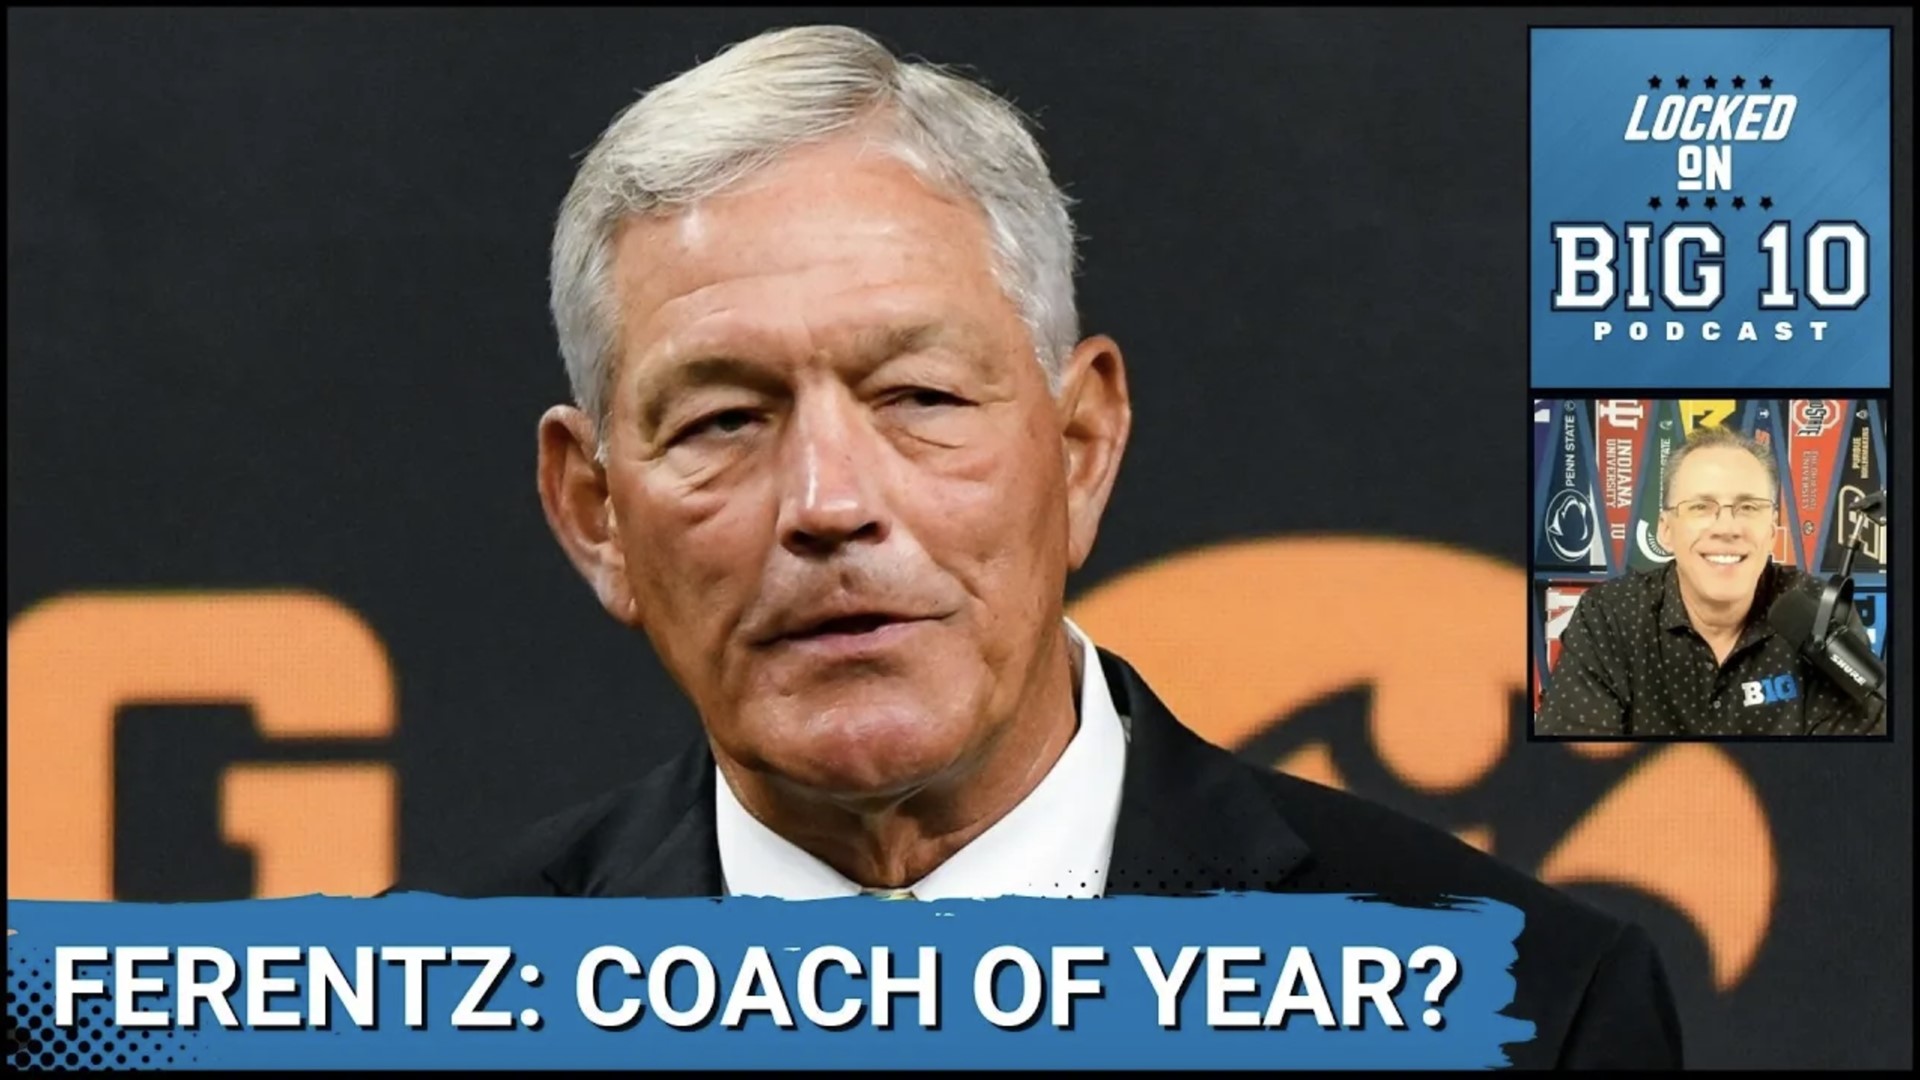 Iowa Hawkeyes football coach Kirk Ferentz should be considered Big 10 Coach of the Year for the magic trick he's pulling off.